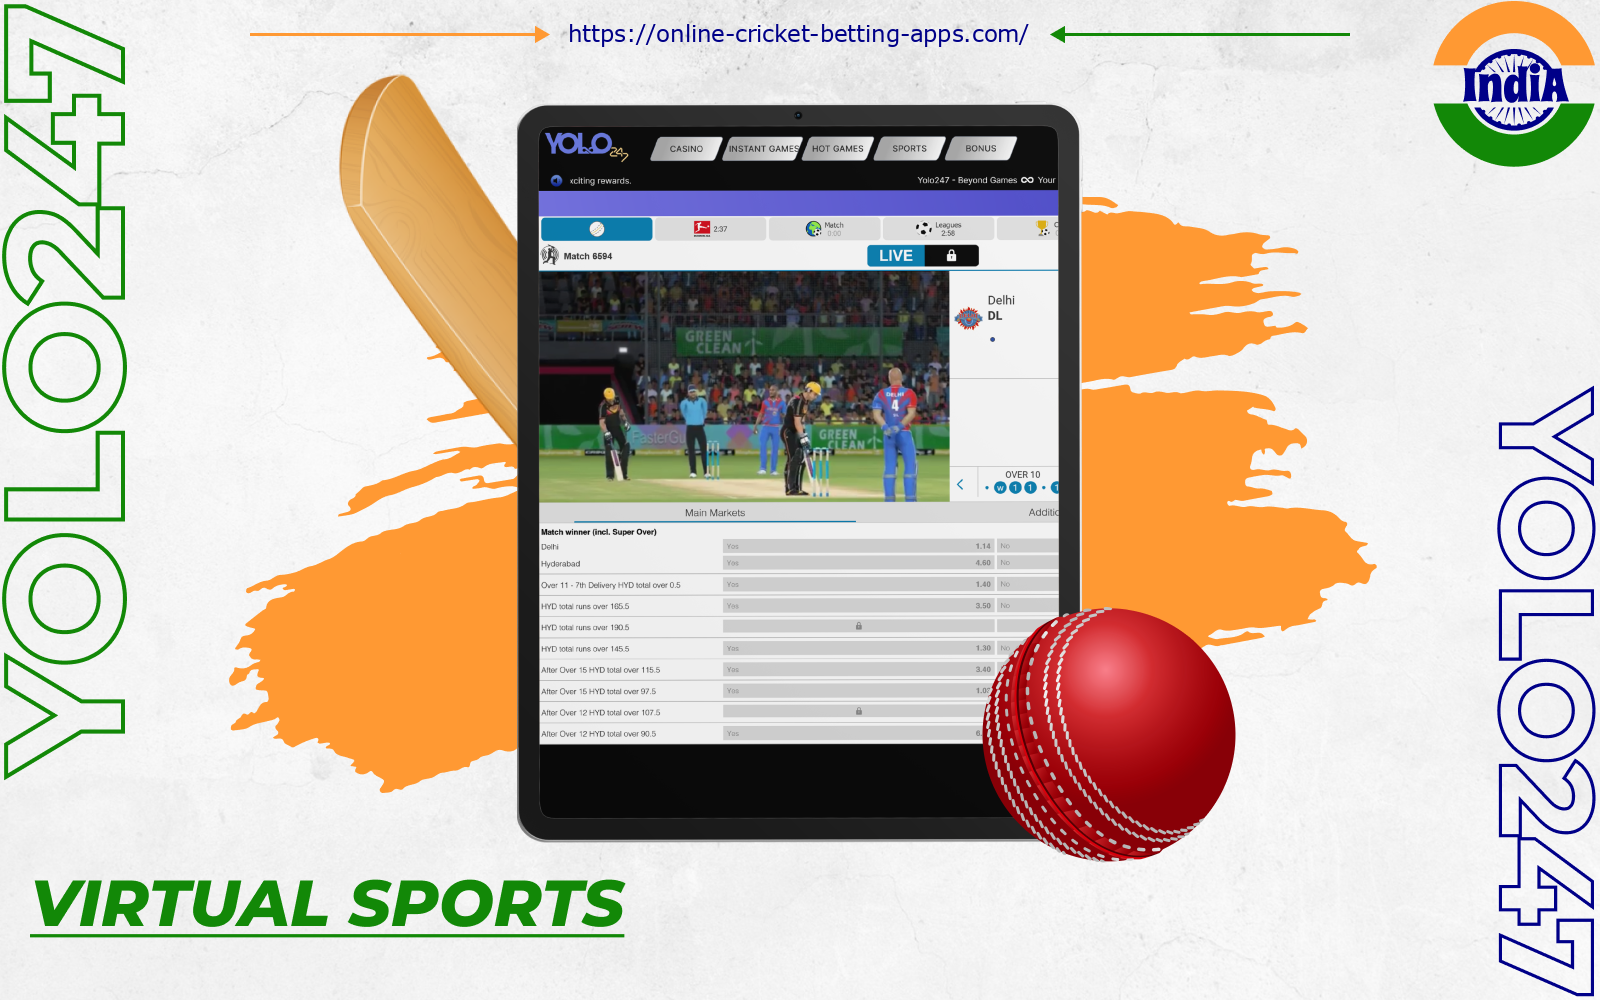 Yolo247 app users from India can bet on virtual sports matches